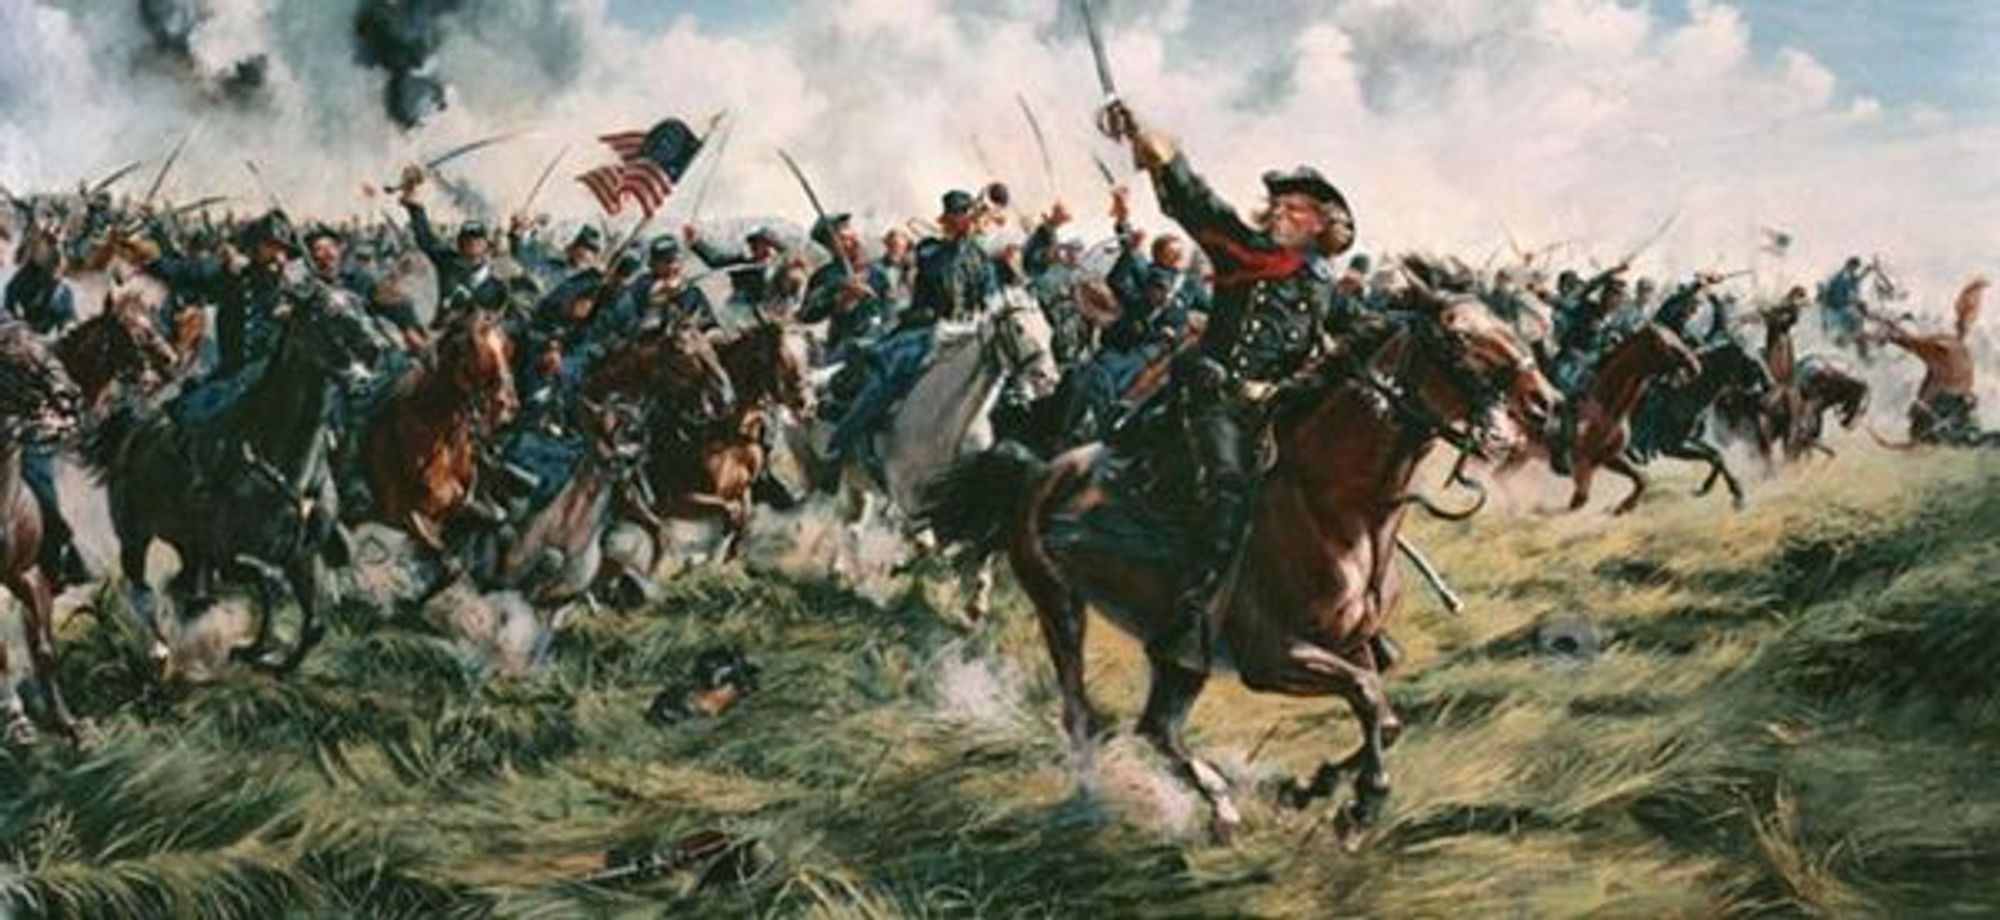 Custers cavalry charge at Gettysburg